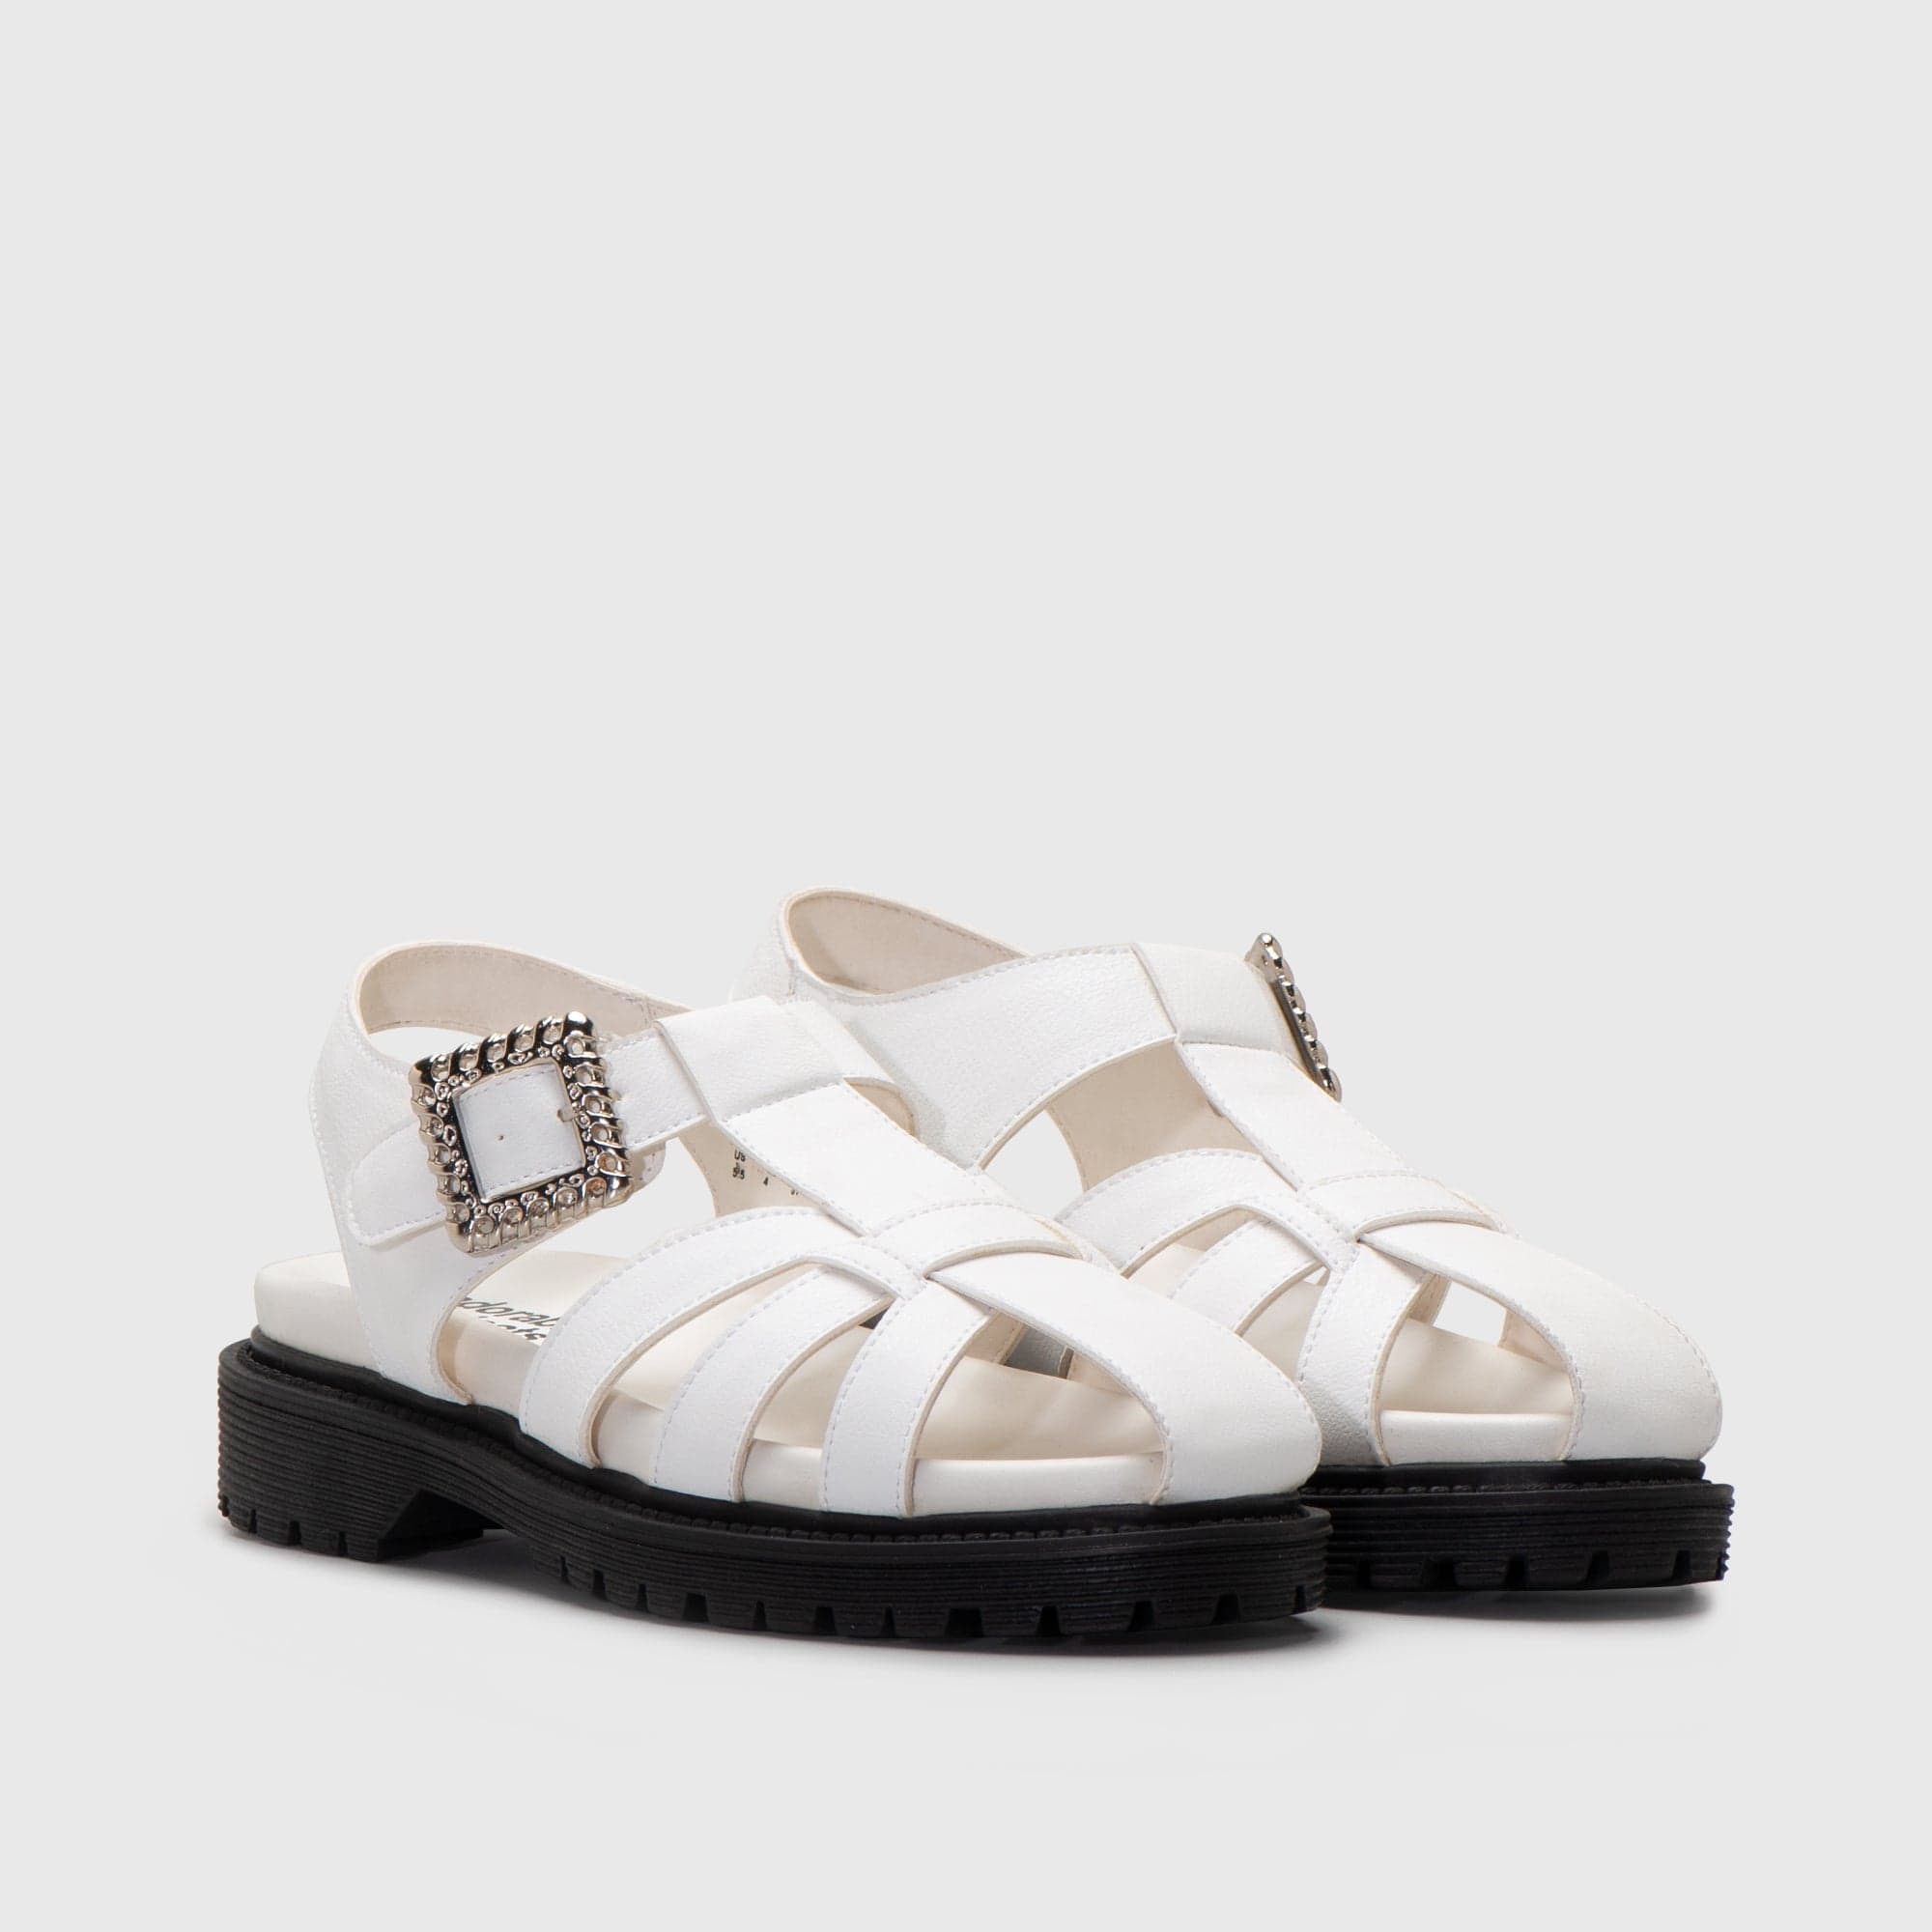 Adorable Projects Official Sandals 41 / White Hanza Sandals White